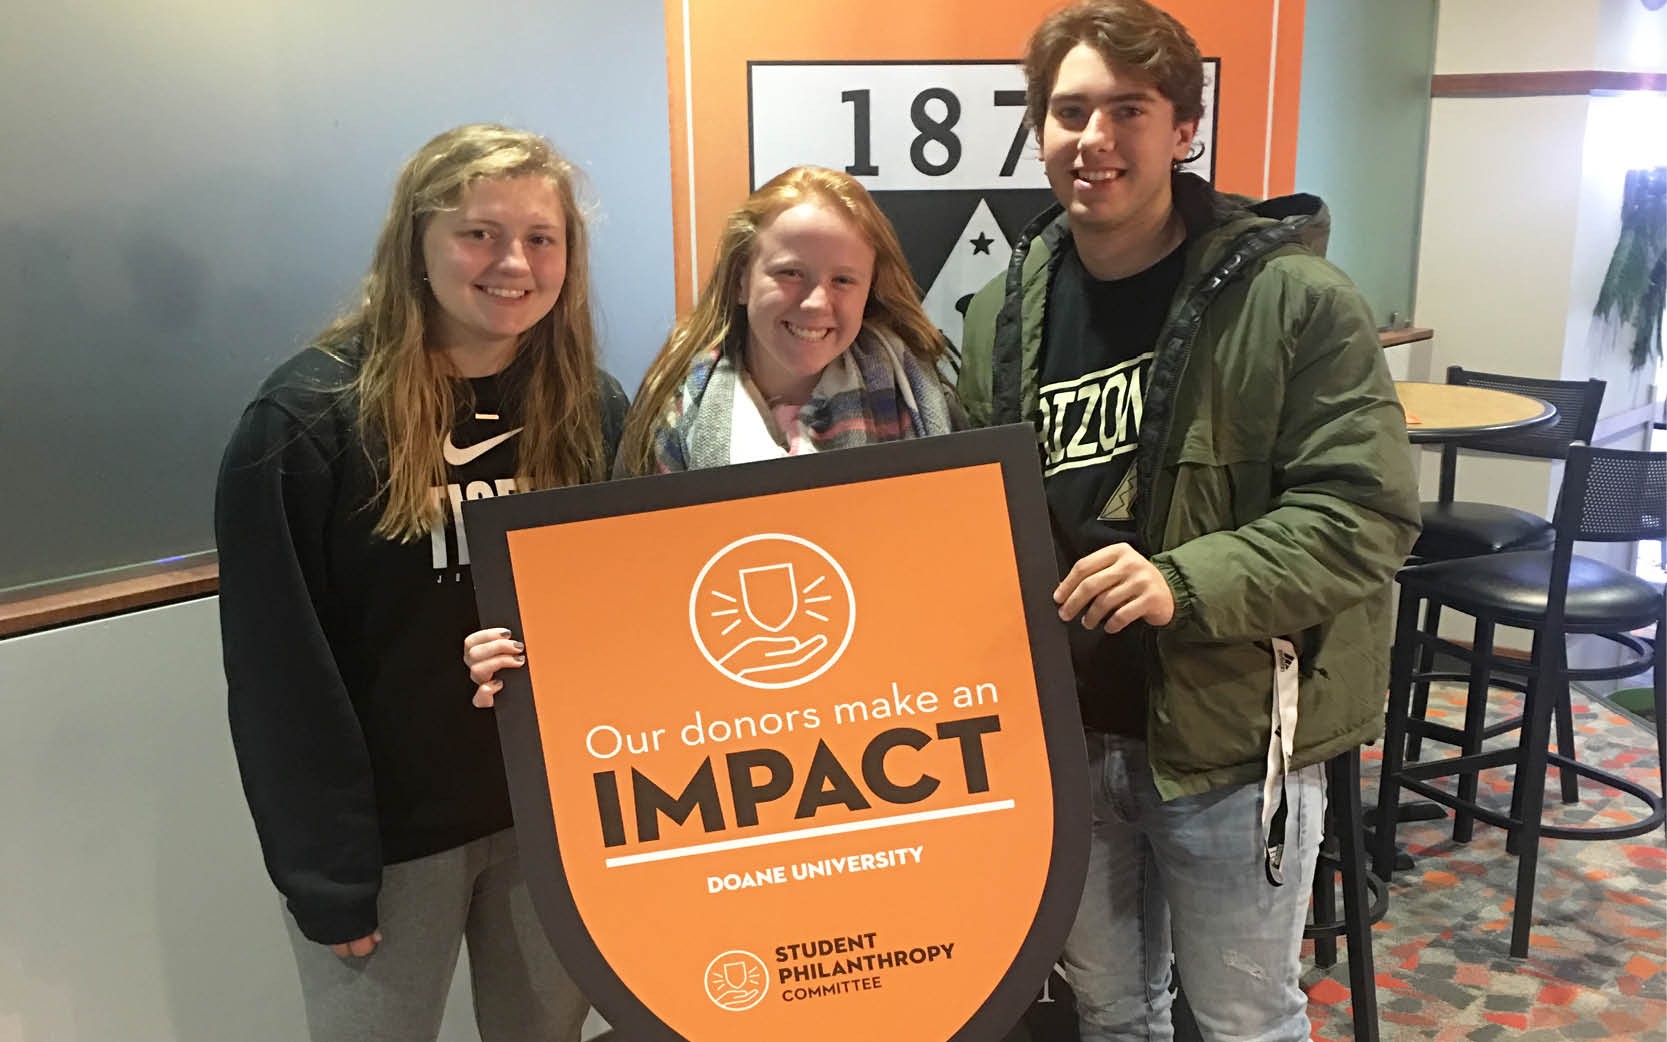 Students holding up an IMPACT banner in a classroom